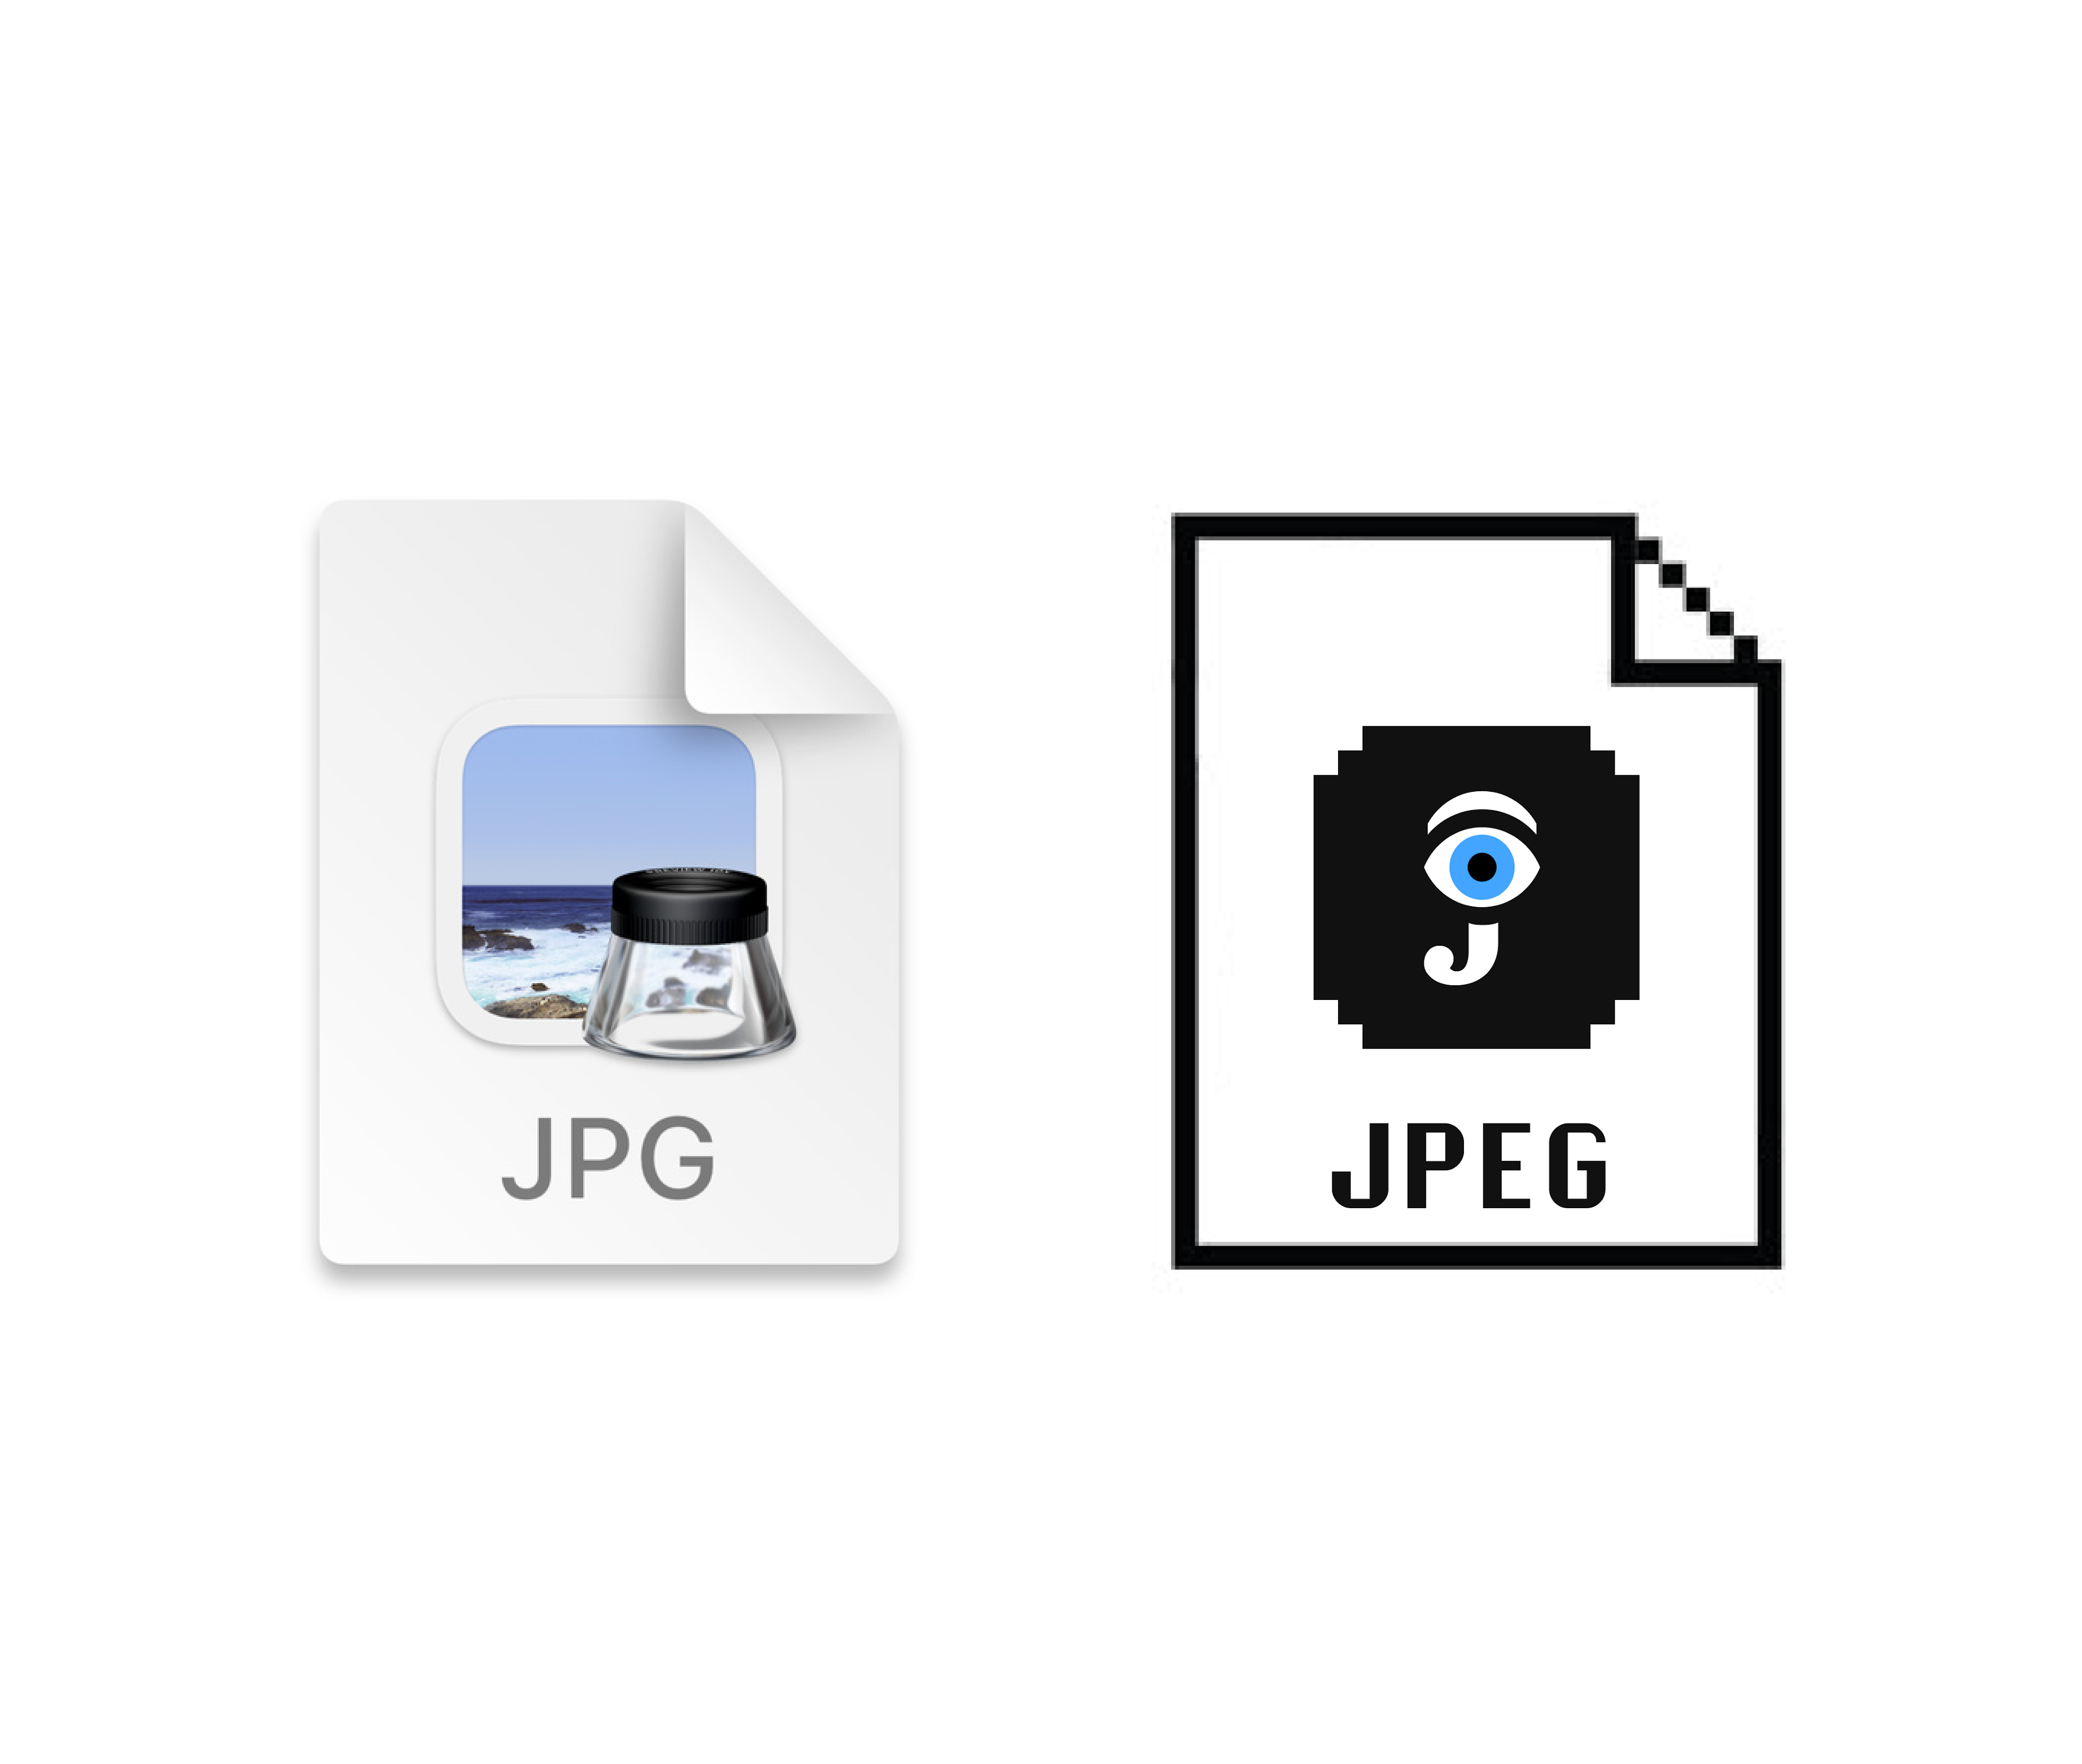 The difference between a JPG and a JPEG